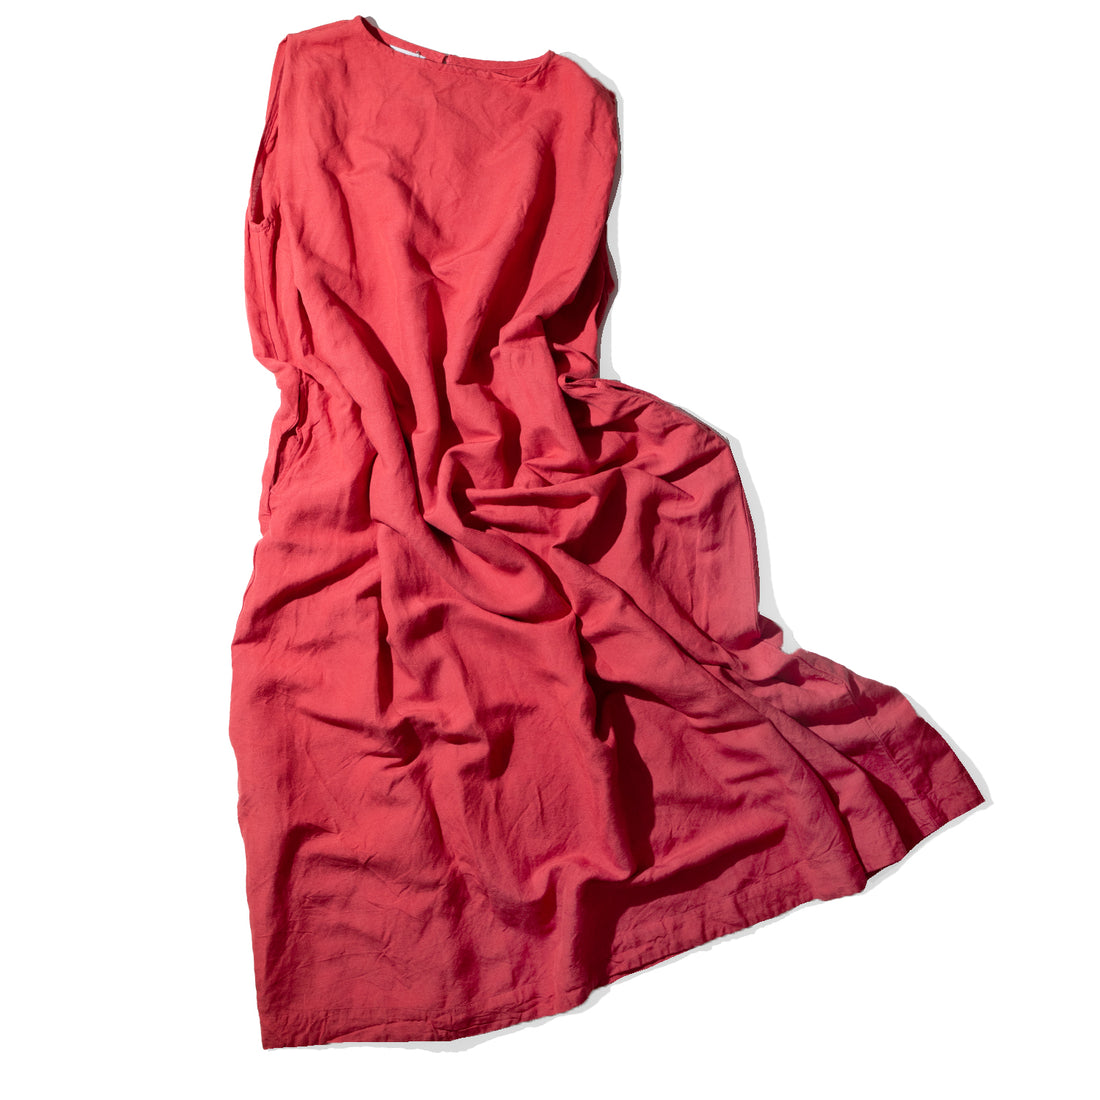 ICHI Rayon Linen Canvas Dress in Red